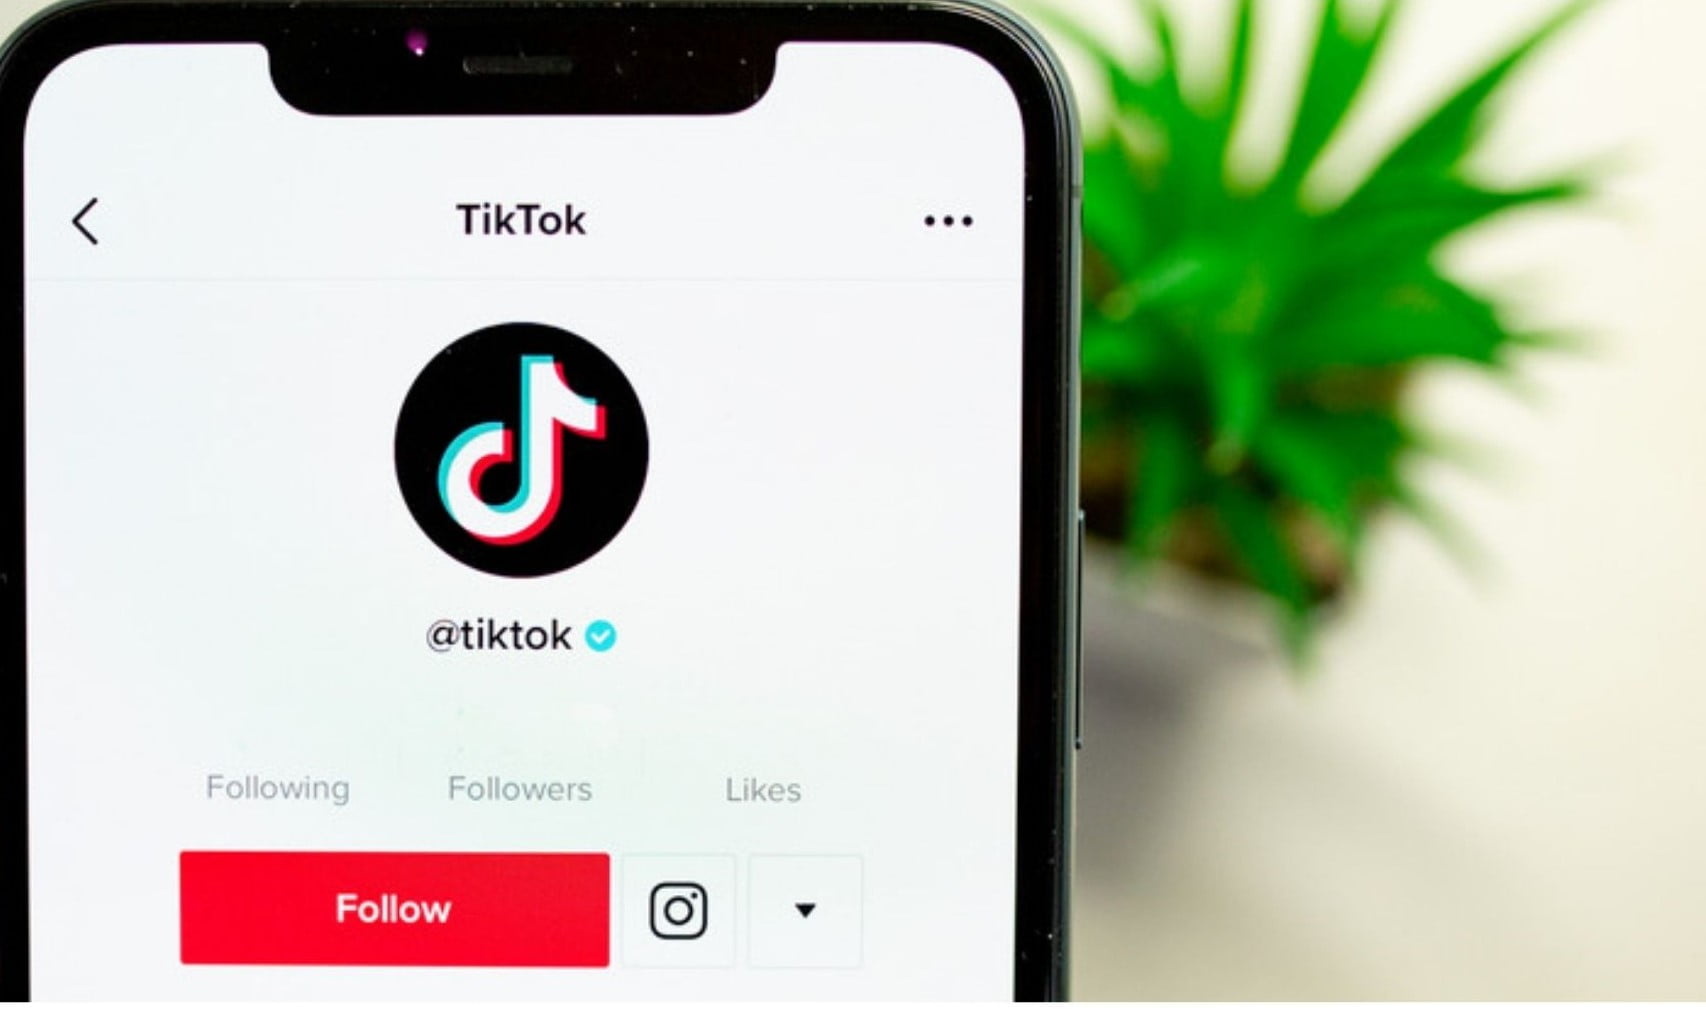 Top 10 Pros And Cons Of TikTok For Kids To Consider.